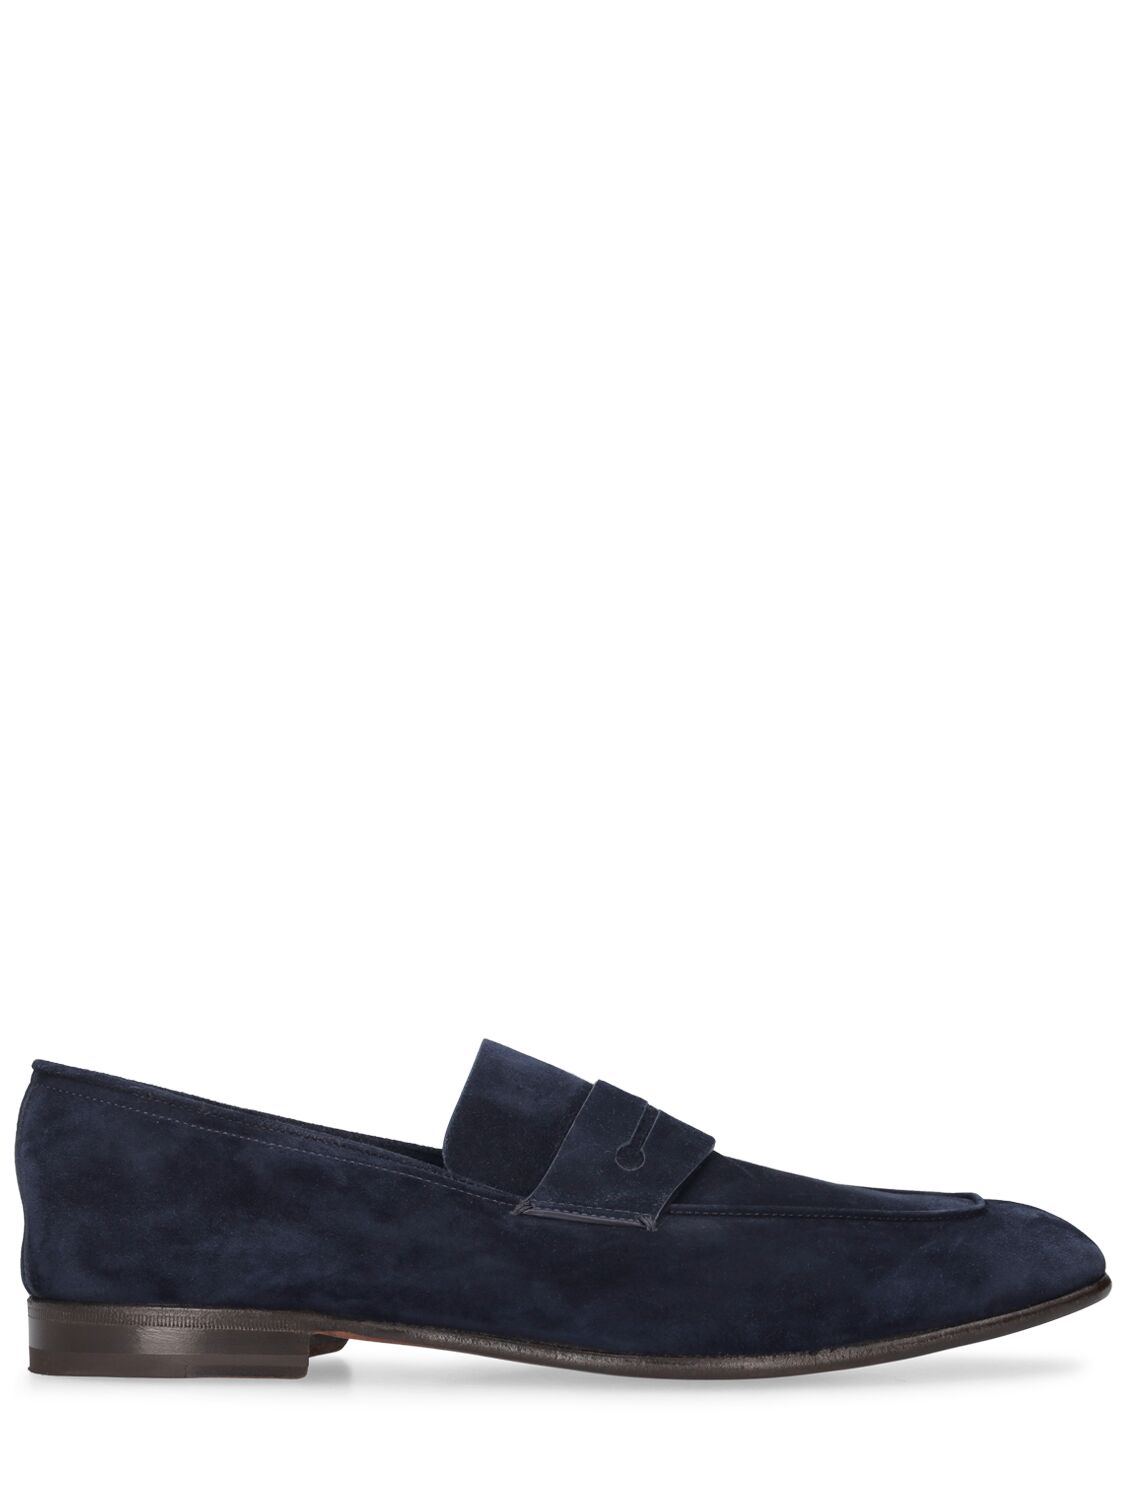 Zegna Suede Loafers In Navy